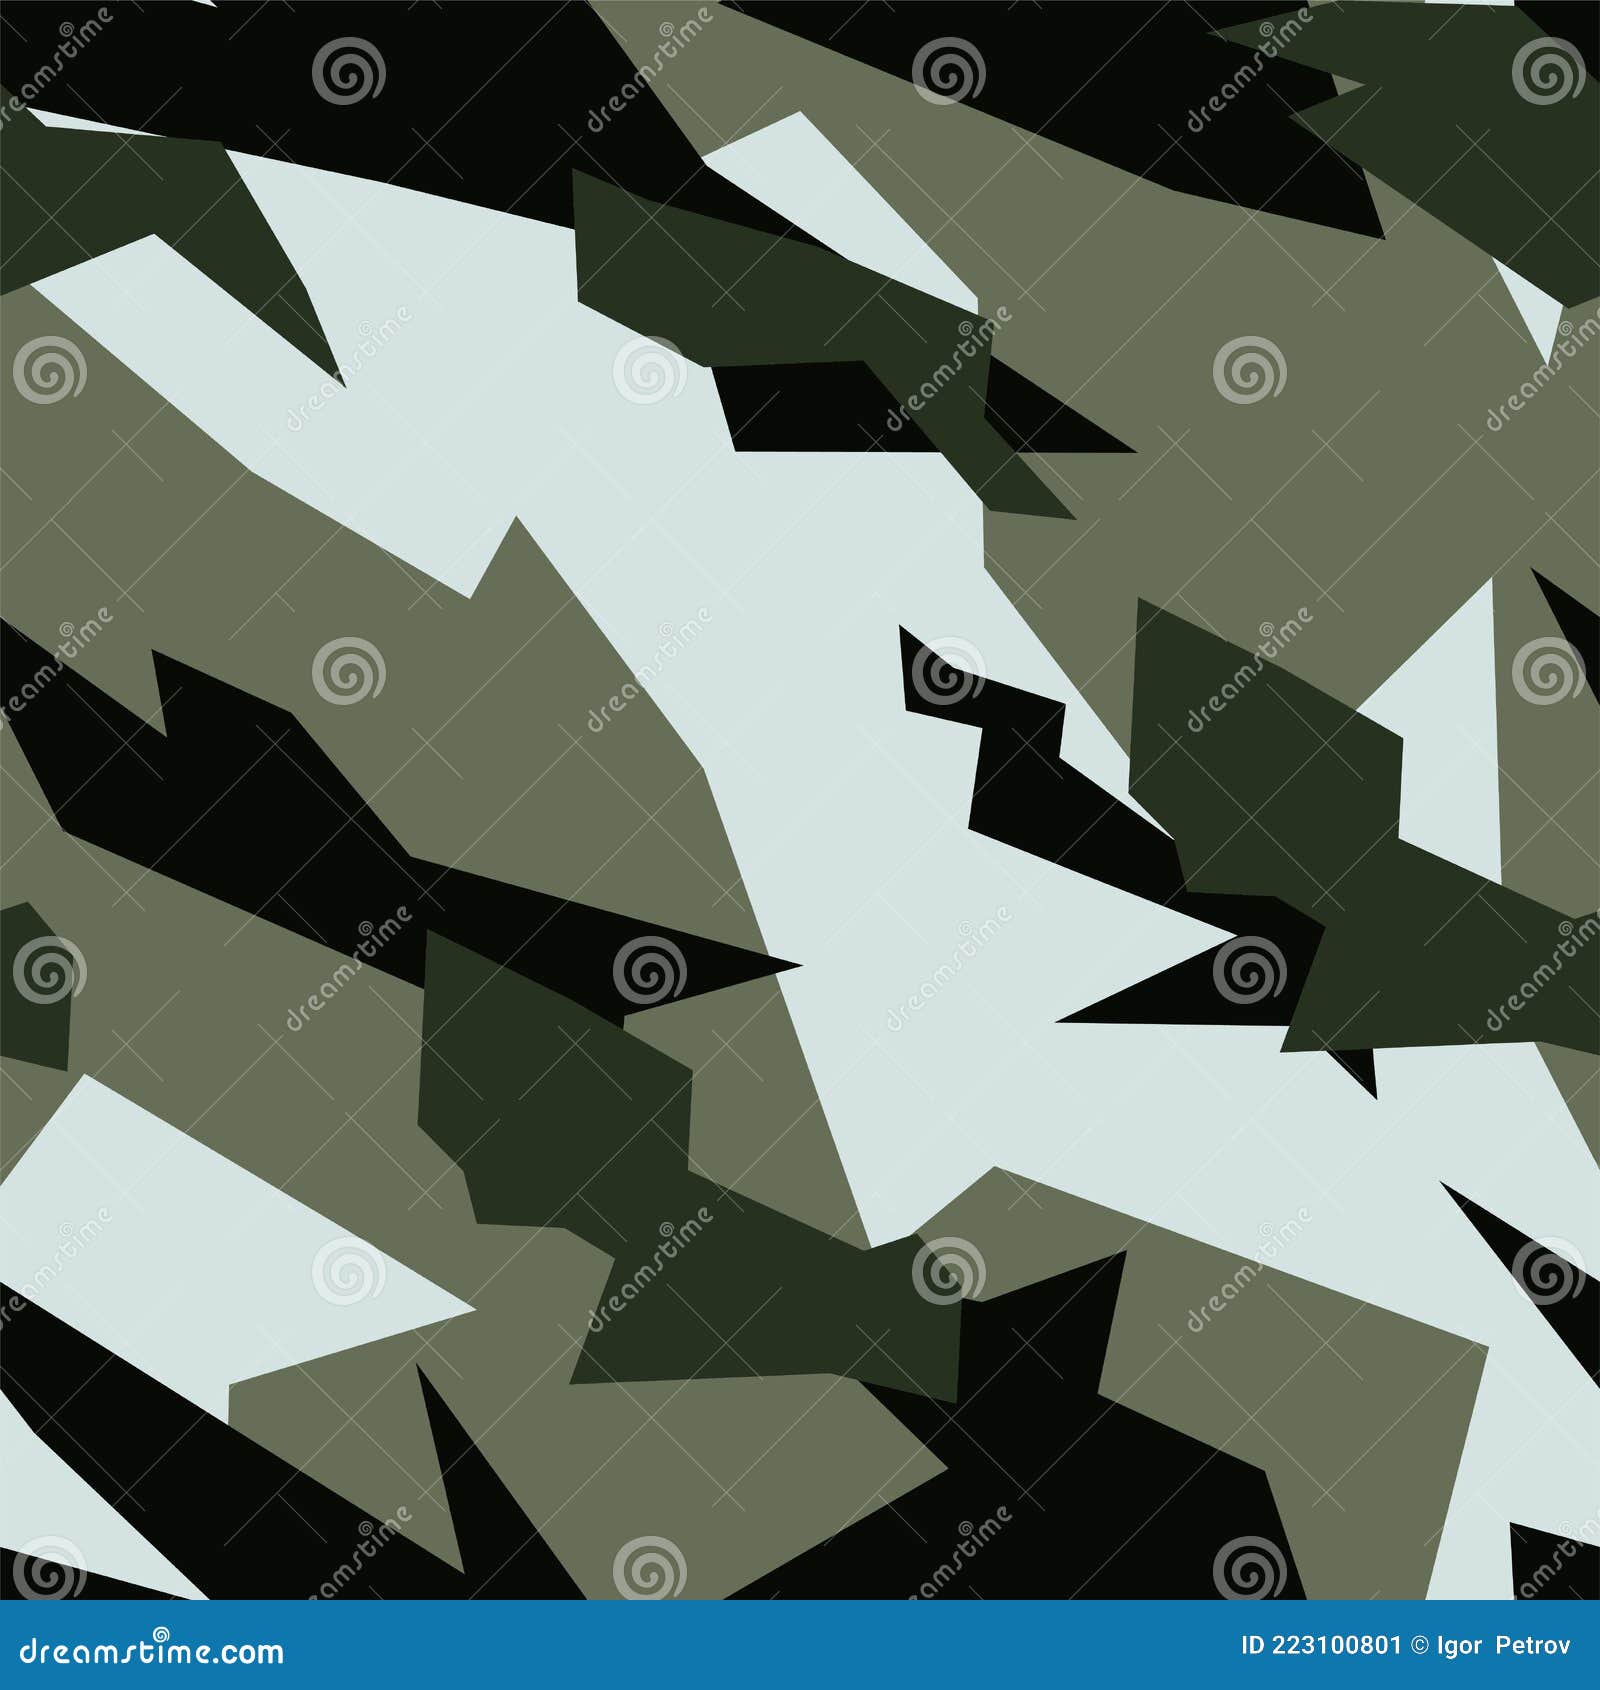 Camouflage seamless pattern texture. Abstract modern vector